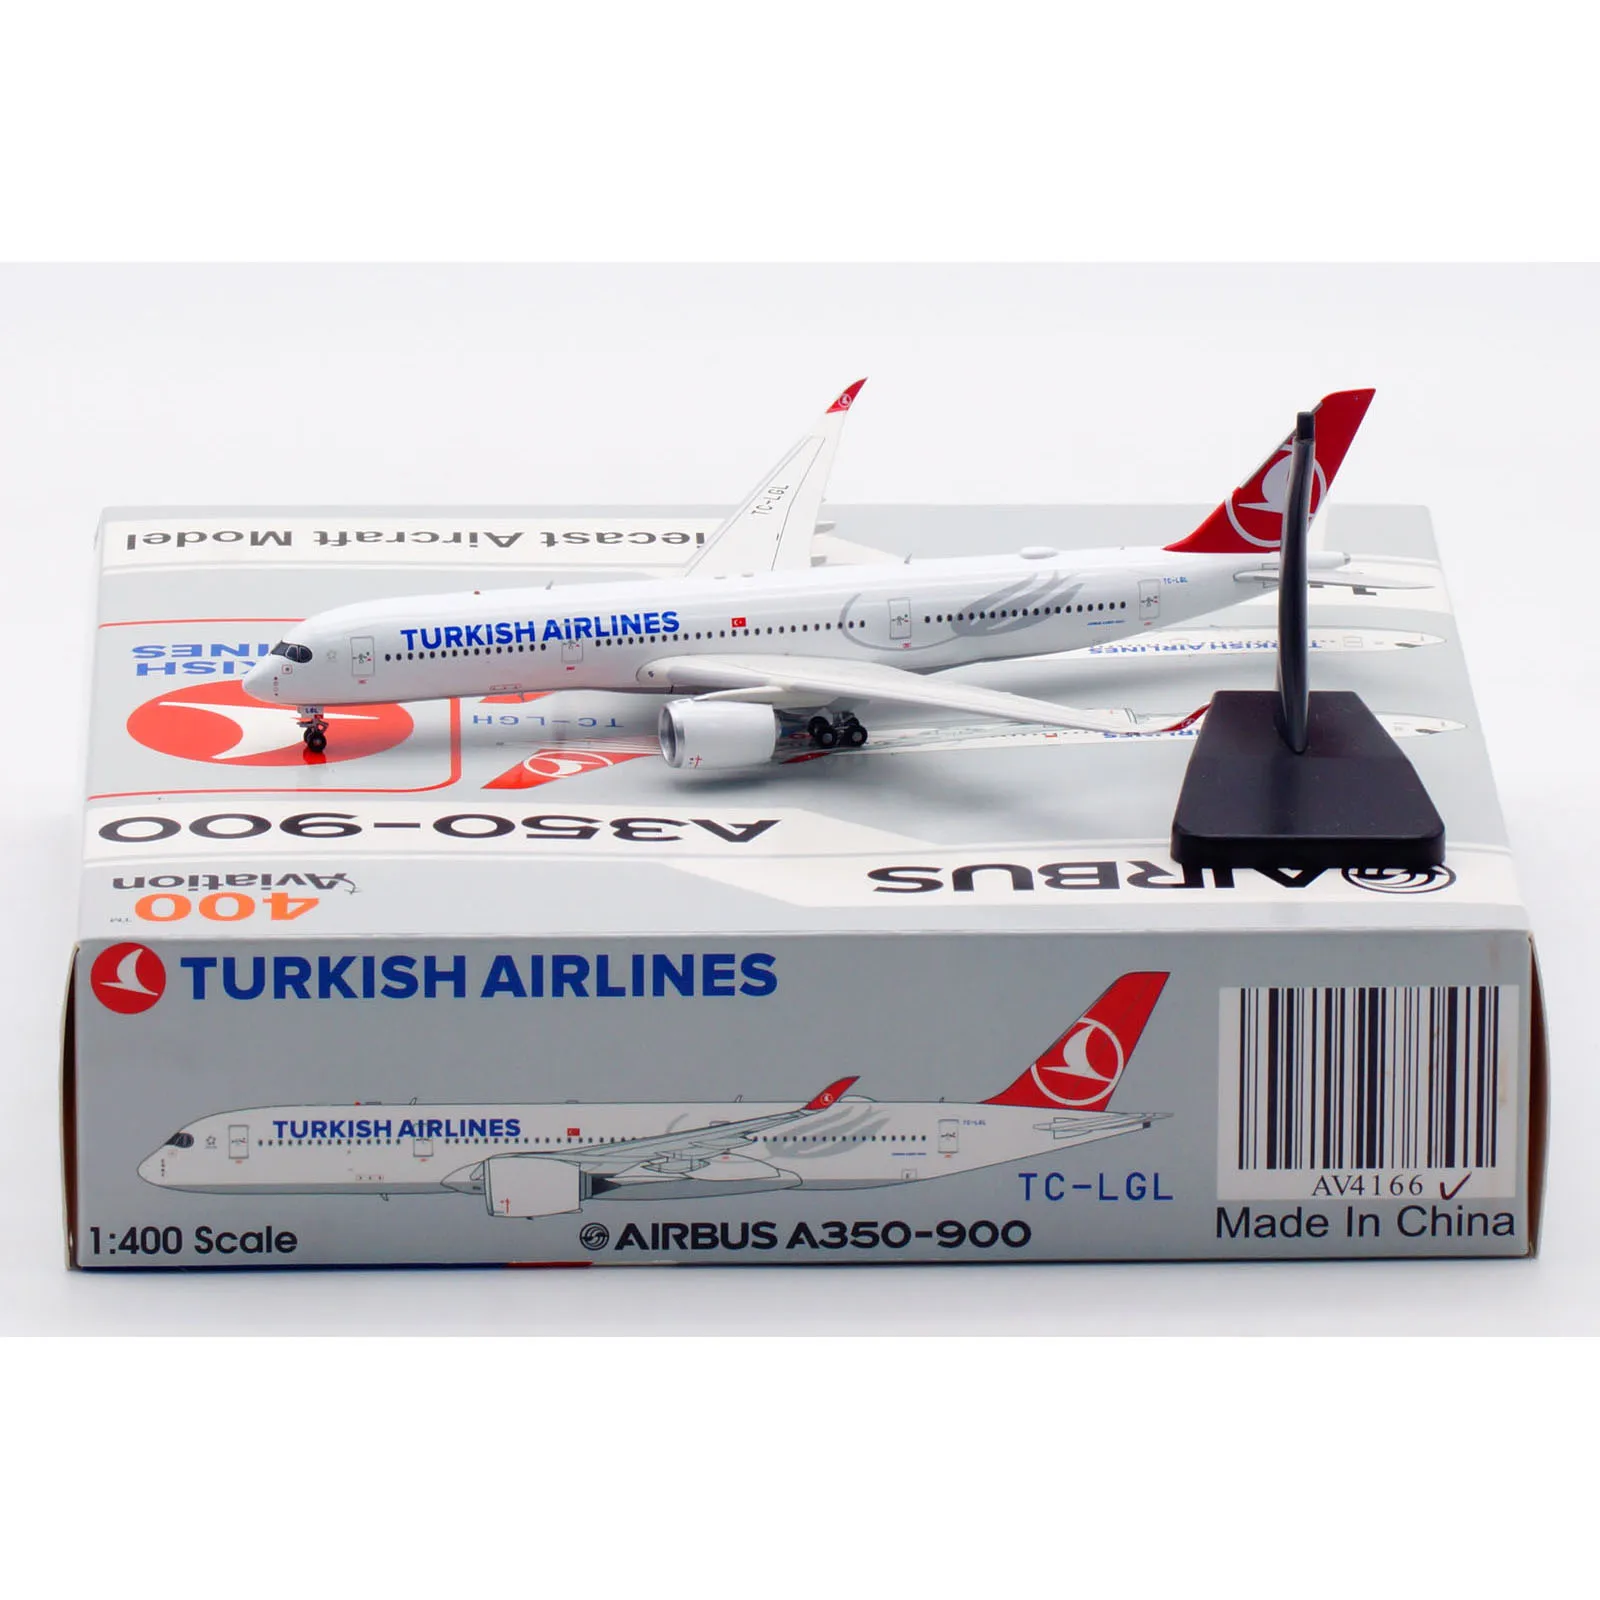 

AV4166 Alloy Collectible Plane Gift Aviation 1:400 Turkish Airlines "StarAlliance" Airbus A350-900 Diecast Aircraft Model TC-LGL